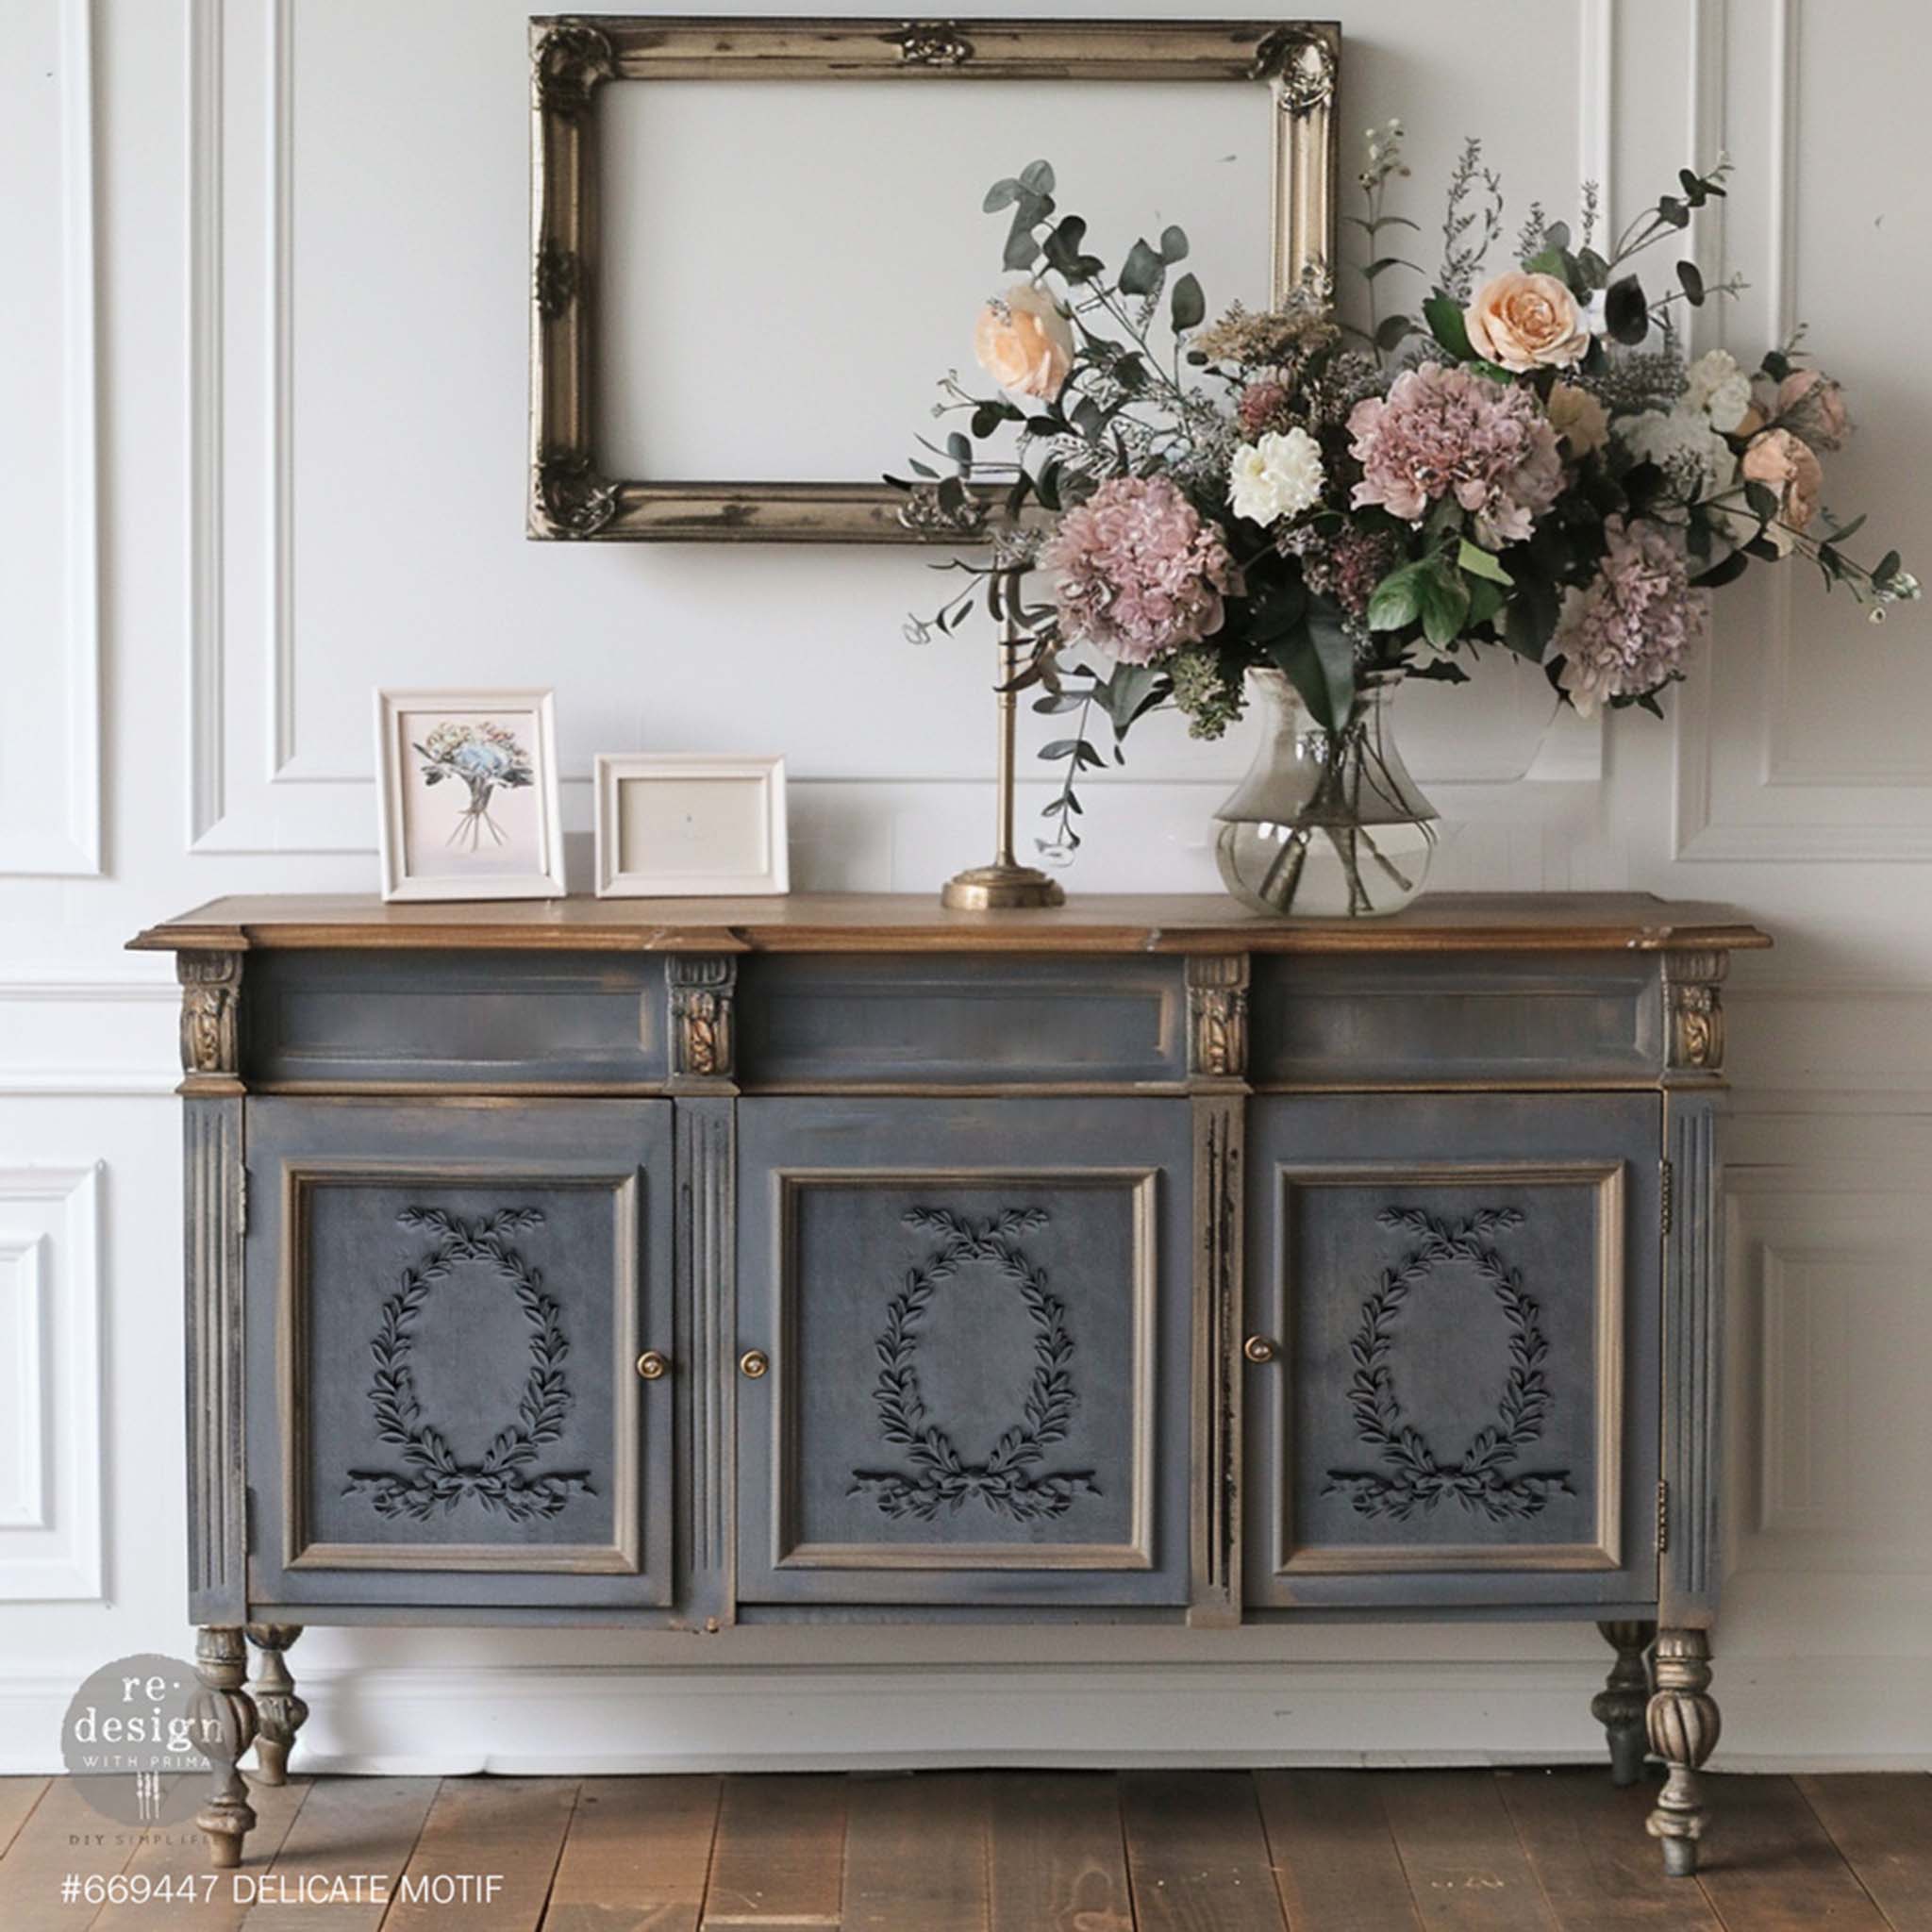 A vintage console table with is painted gray with bronze accents and features ReDesign with Prima's Delicate Motif Decor Poly Casting bendable furniture appliques on its 3 doors.